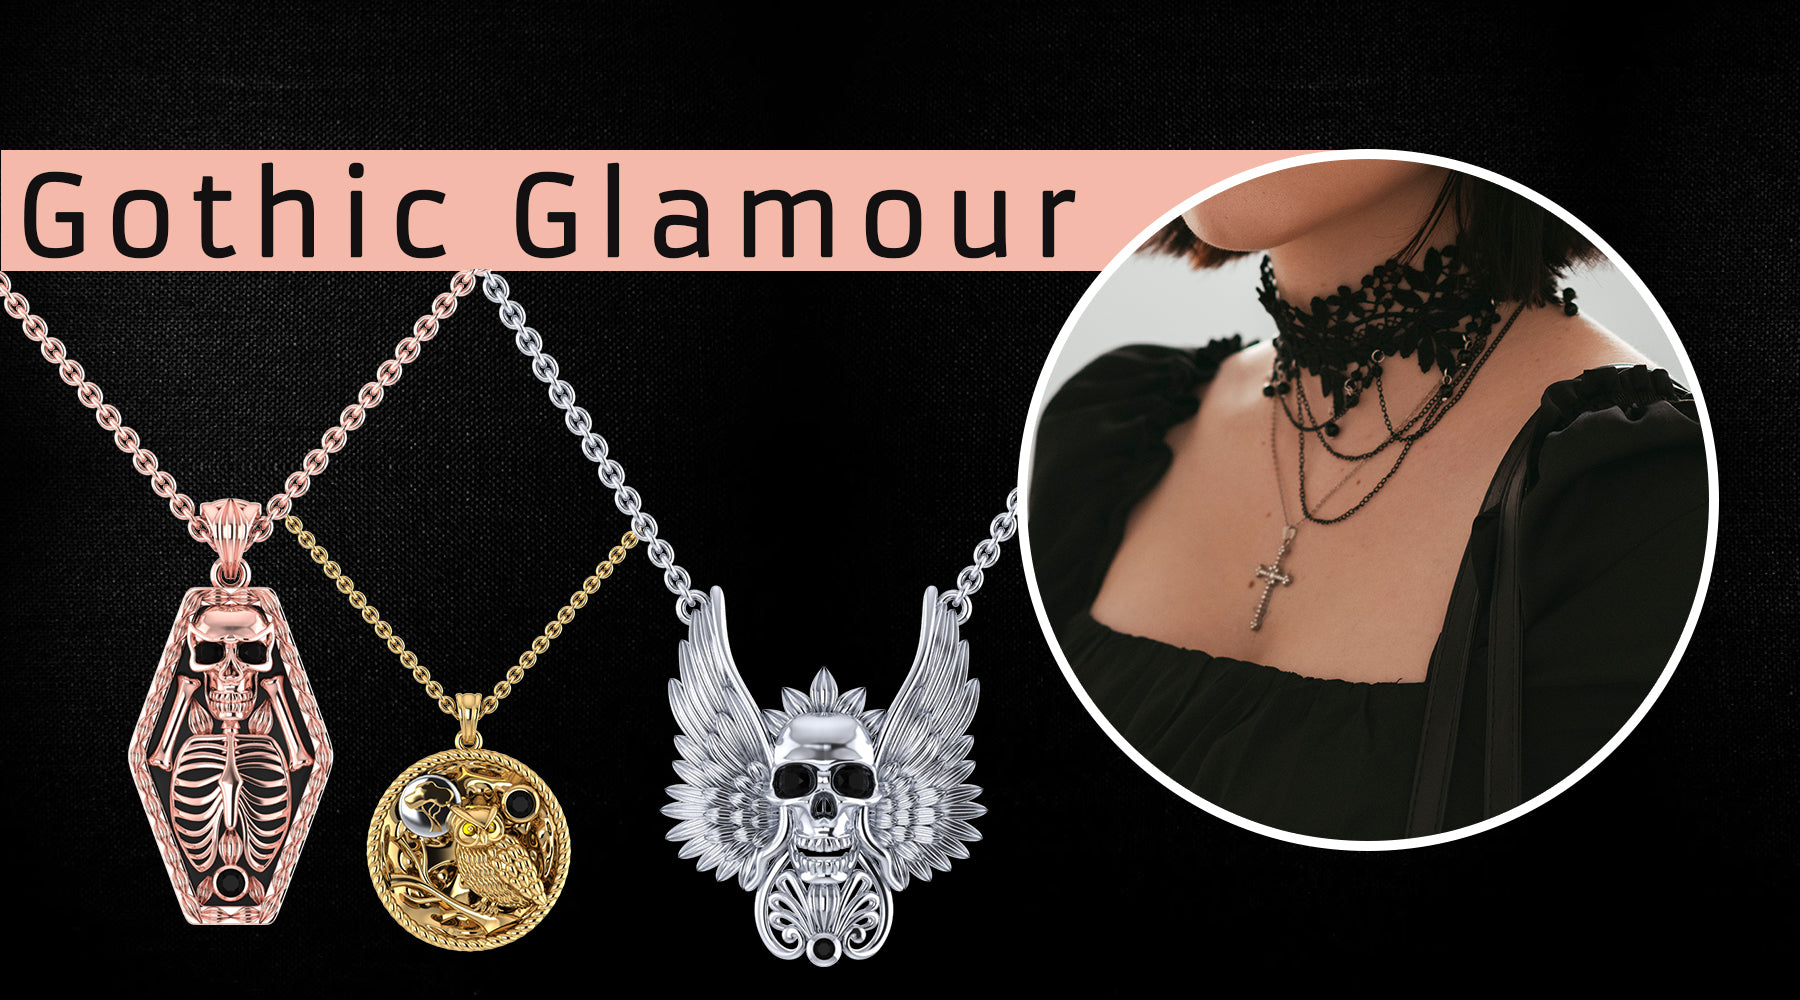 A Gothic Glamour Look with Statement Pieces and Stupendous Accents